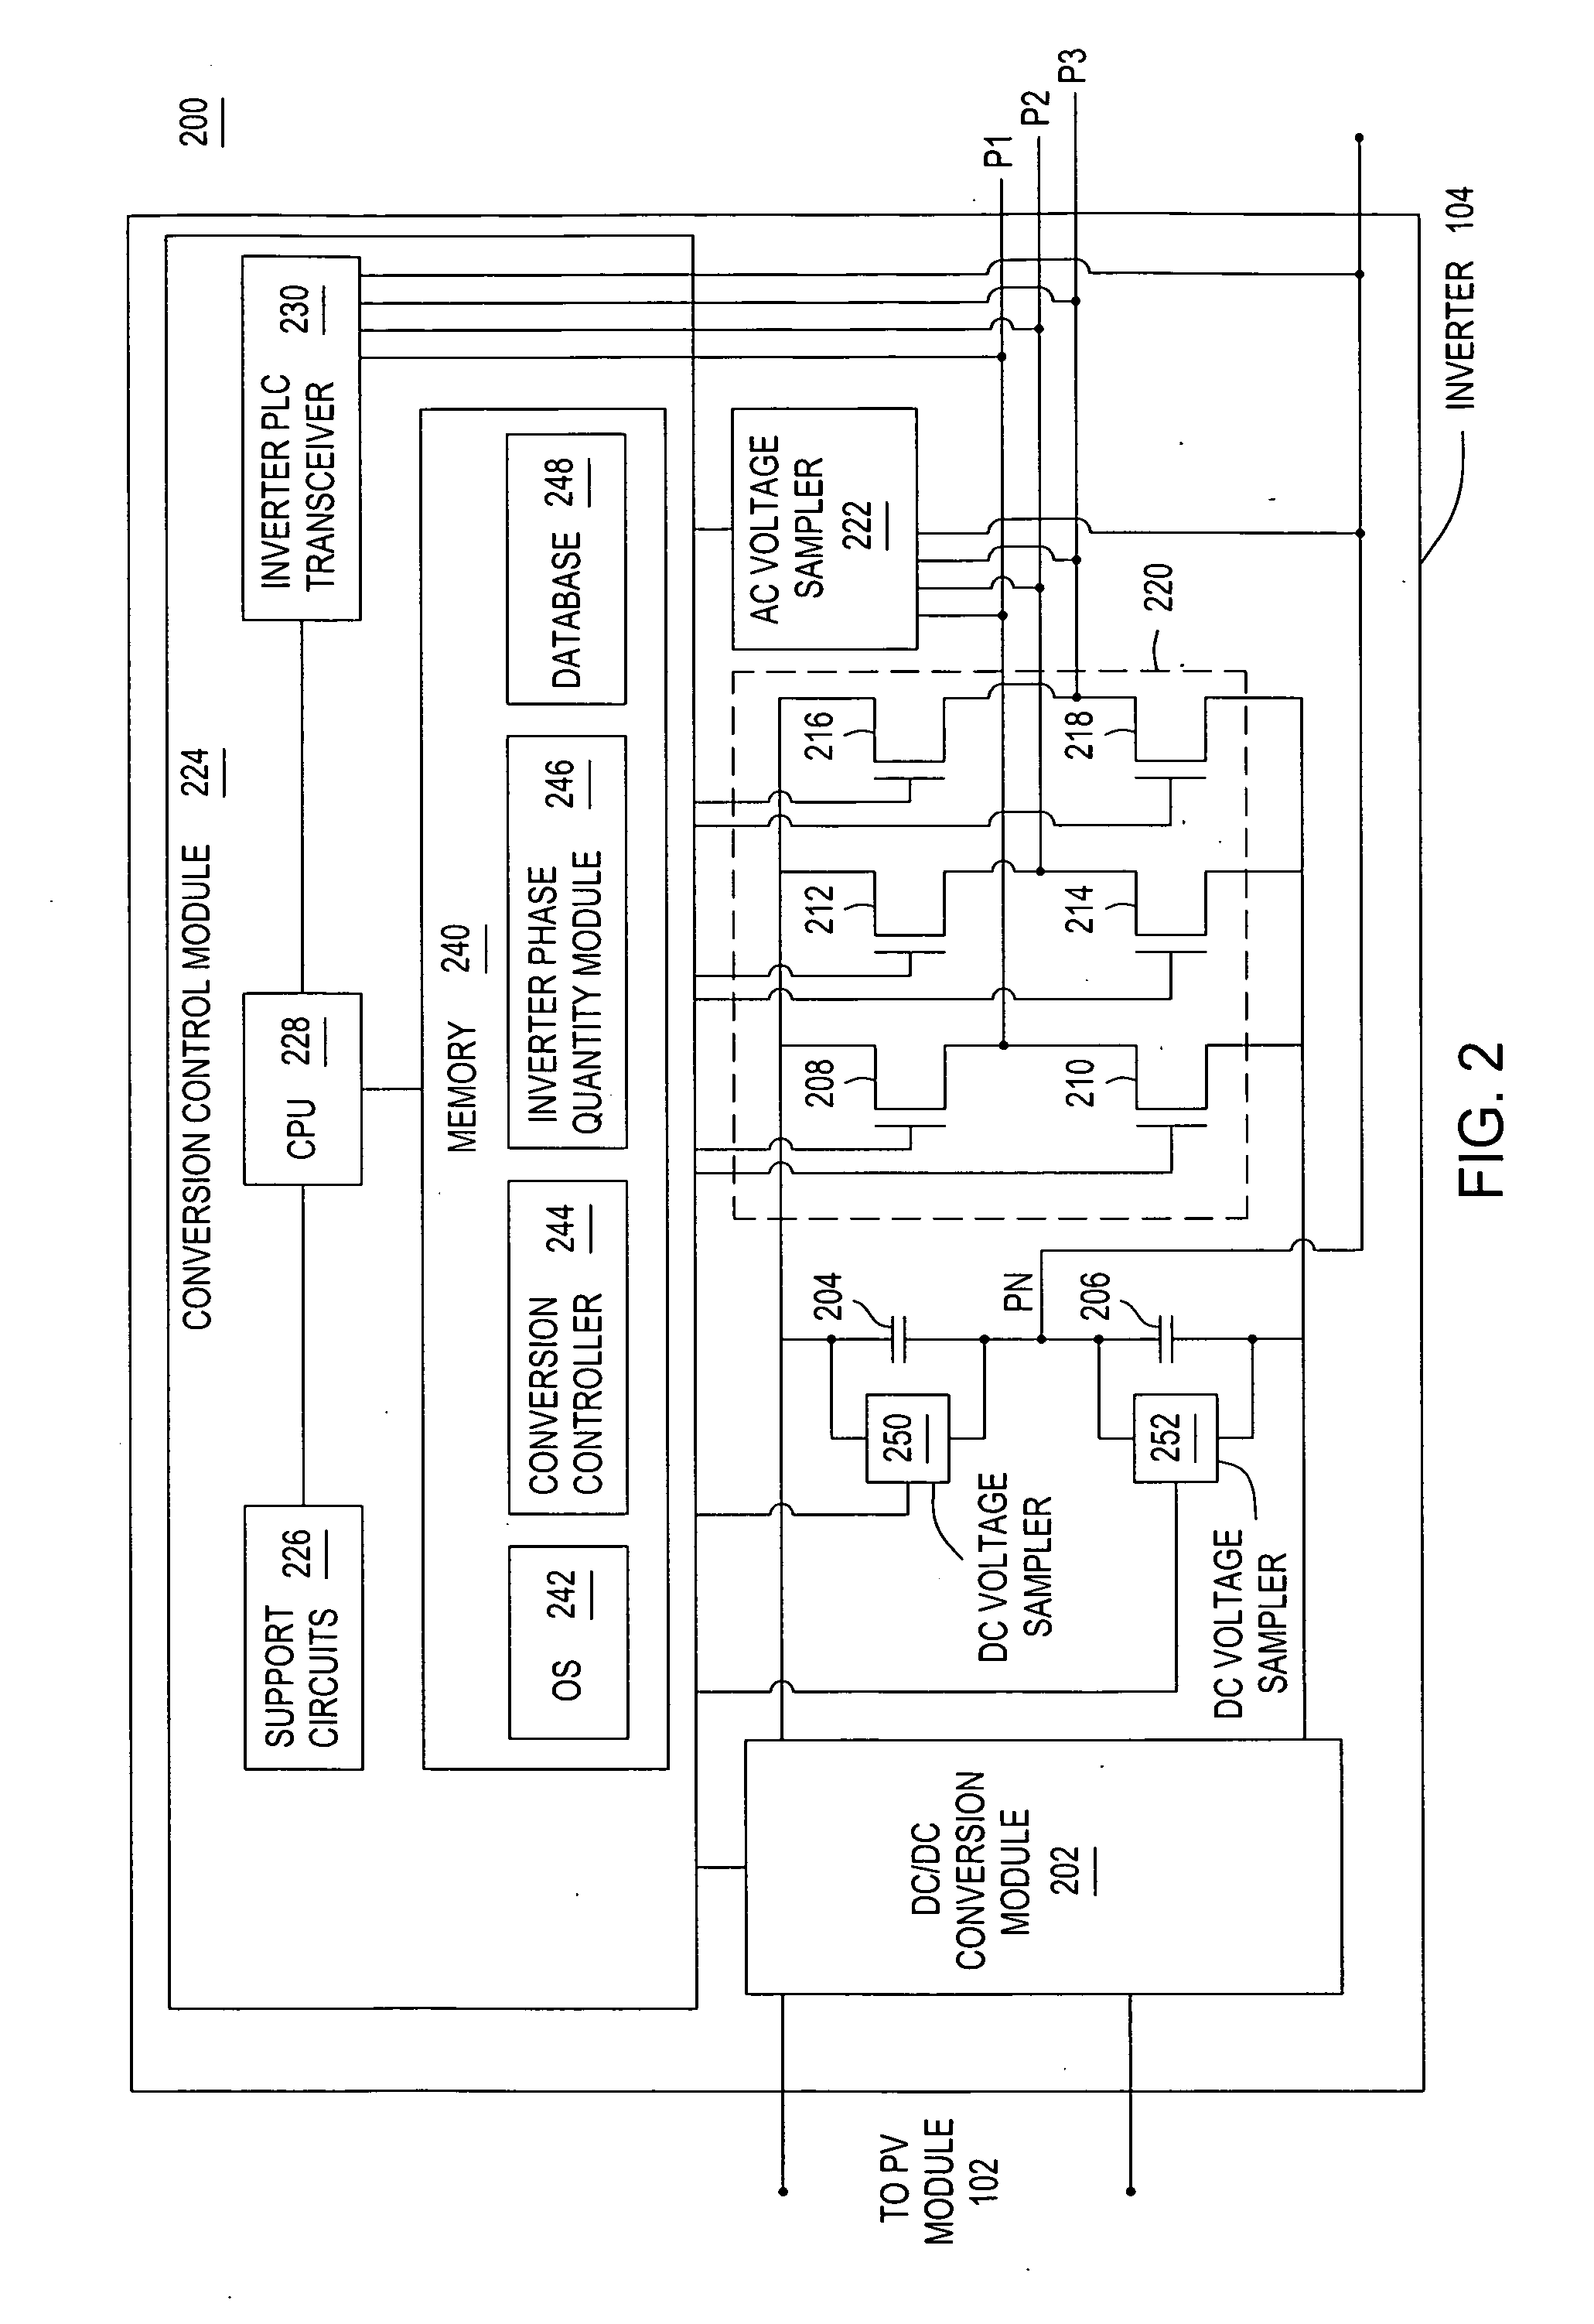 Method and apparatus for distributed power generation